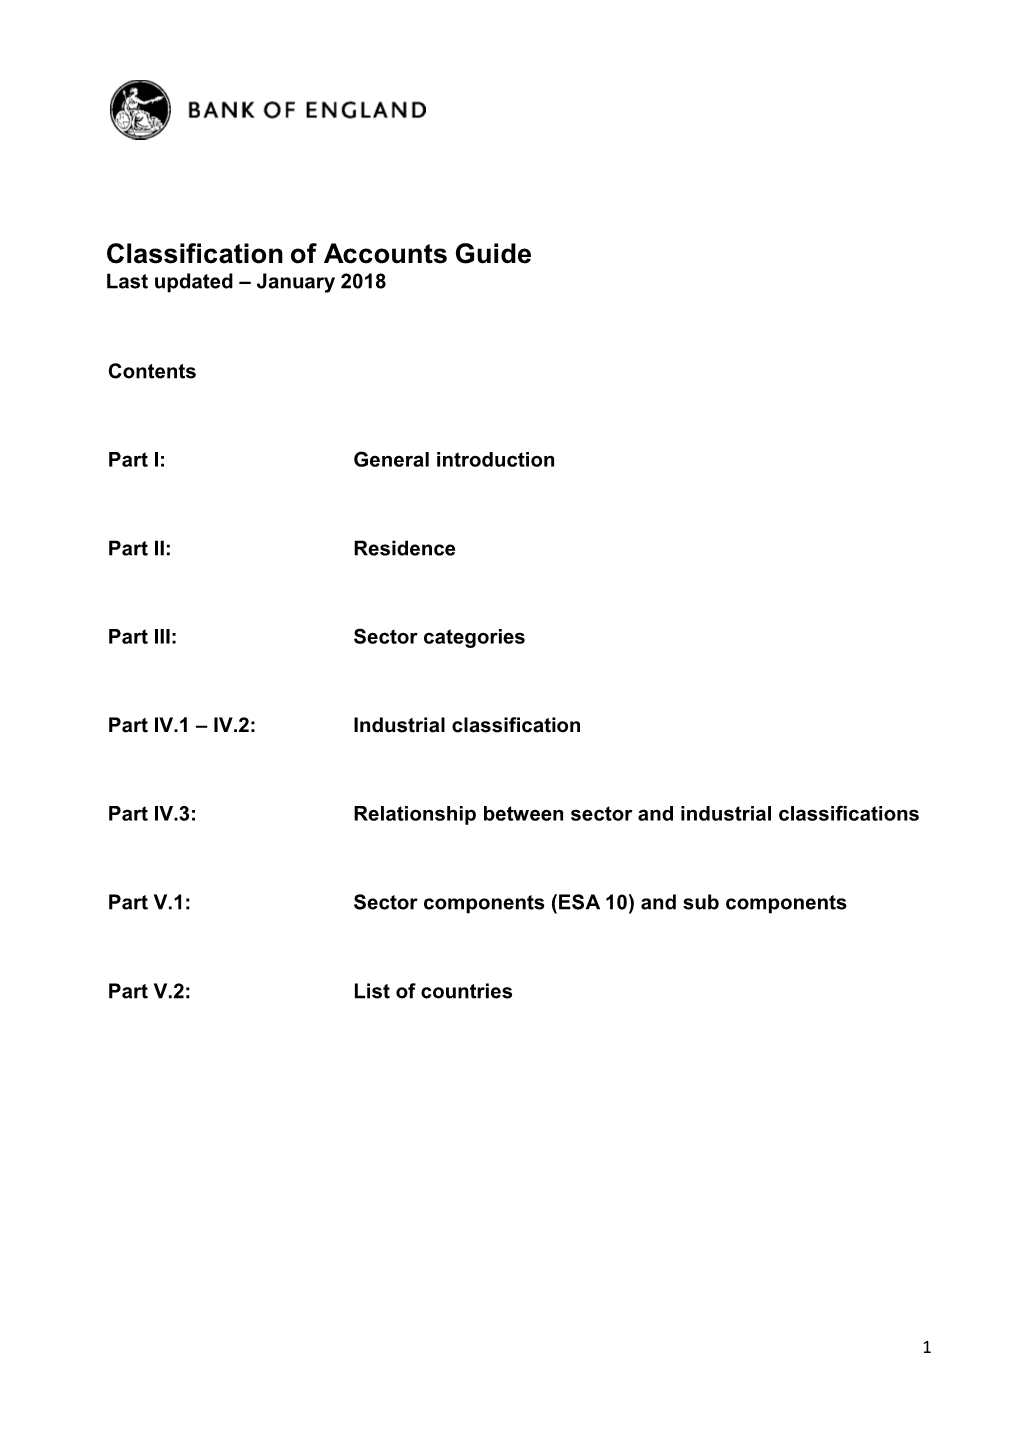 Classification of Accounts Guide Last Updated – January 2018